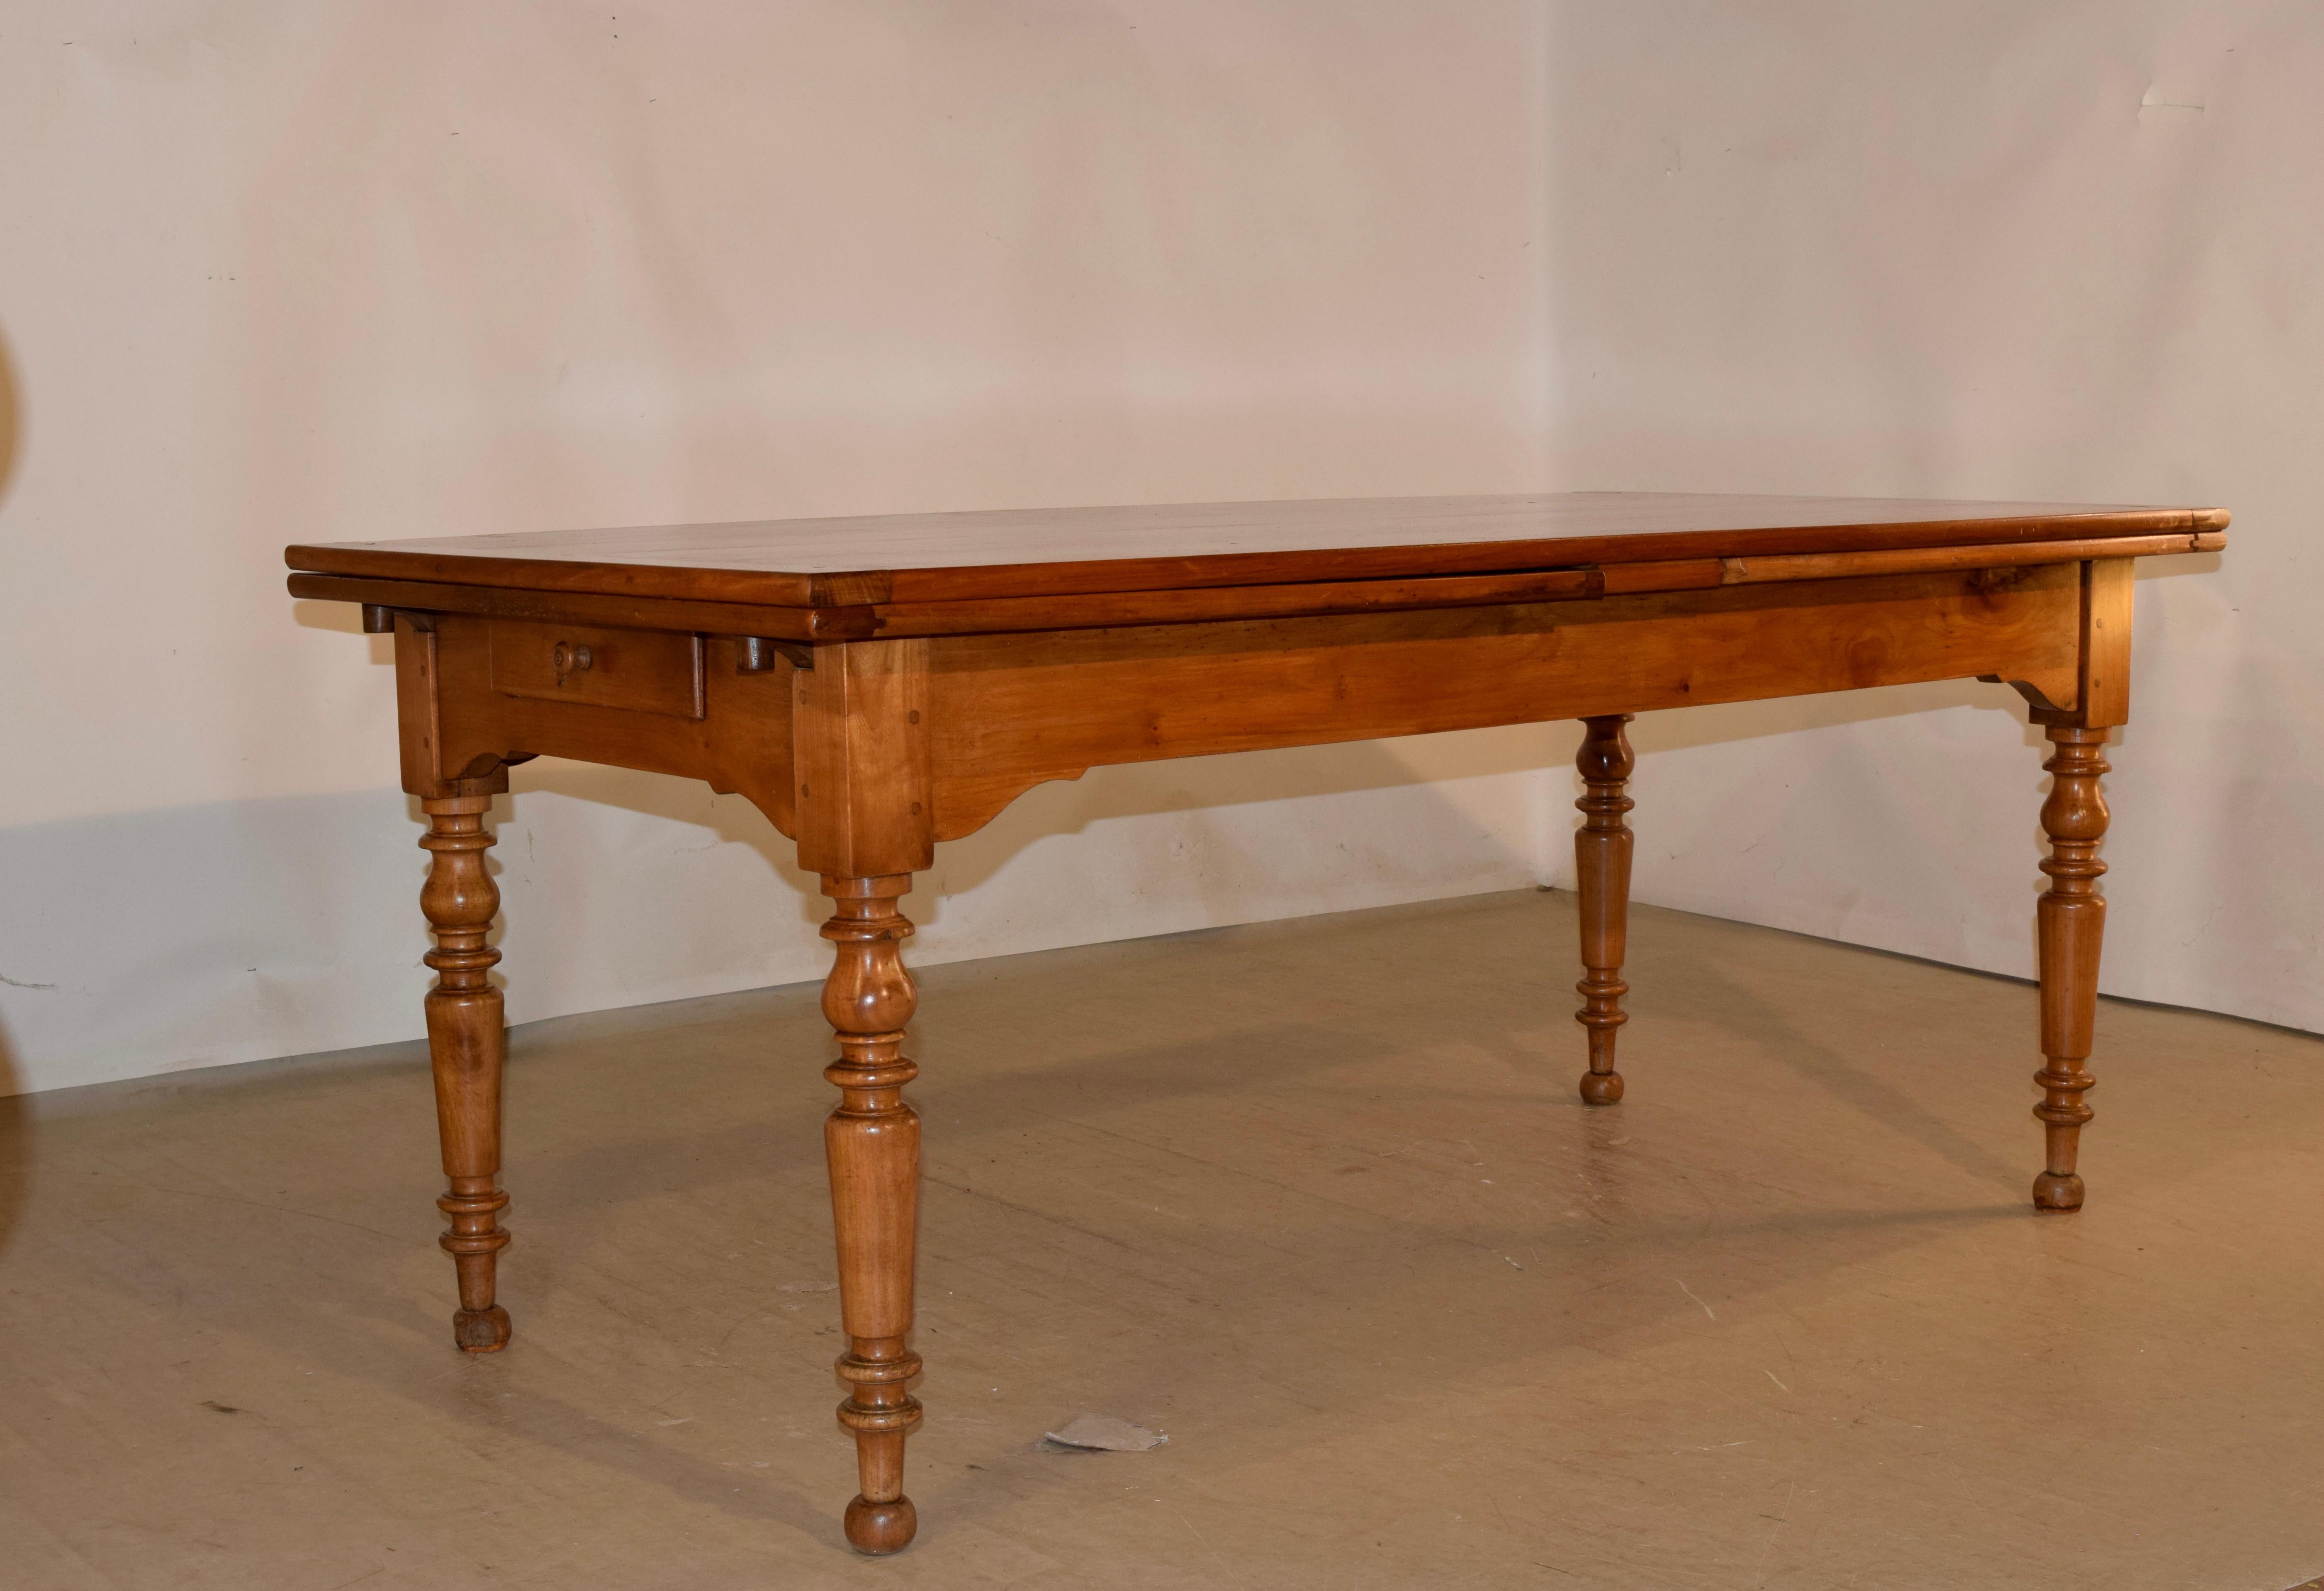 19th century cherry farm table from France which has double draw leaves. The cherry is a gorgeous color with wonderful patina. This fabulous table is handy for any space, since it can extend into a large table. The top is made from four boards, with